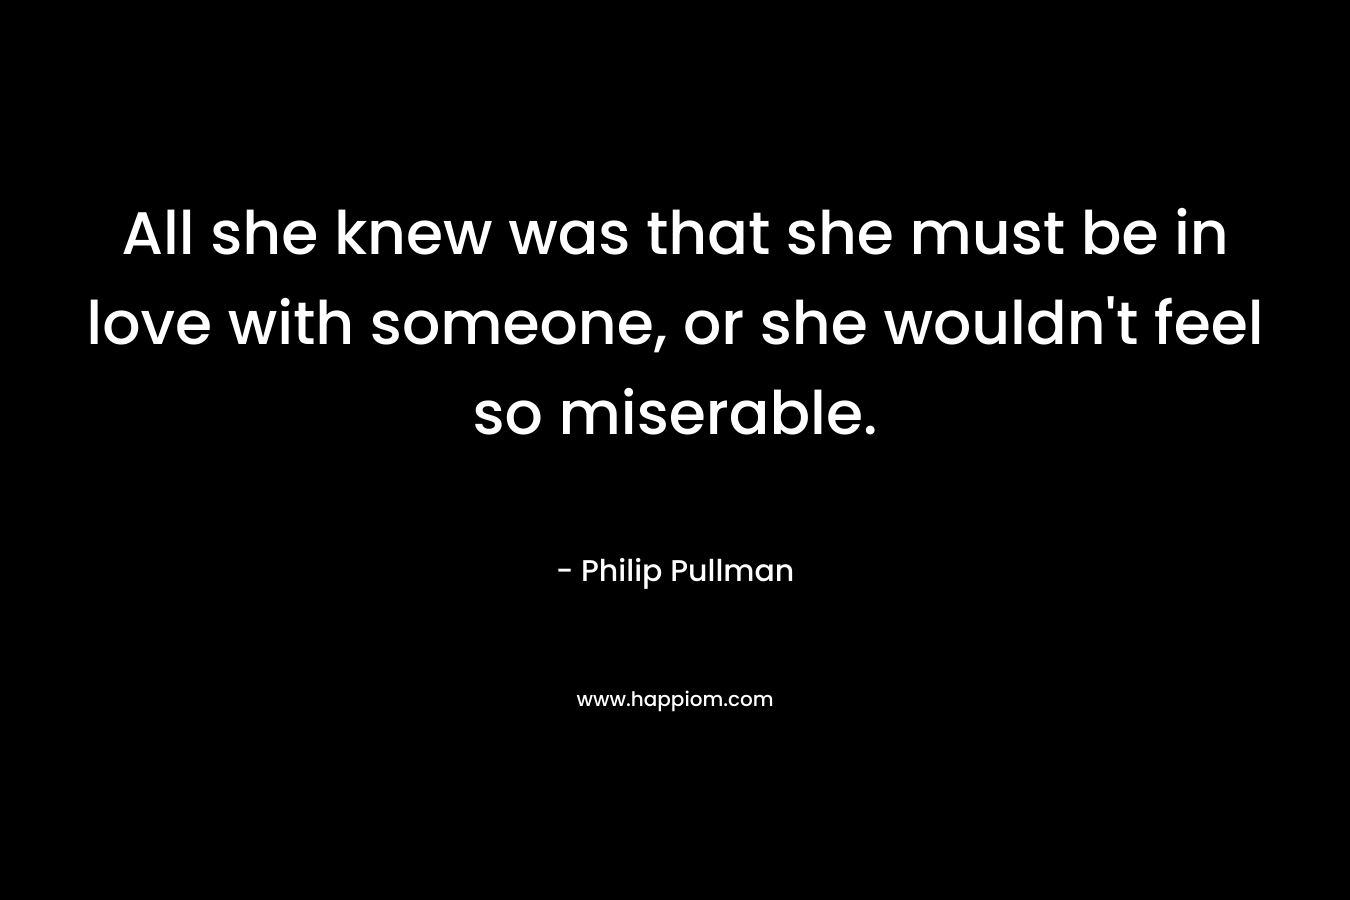 All she knew was that she must be in love with someone, or she wouldn’t feel so miserable. – Philip Pullman